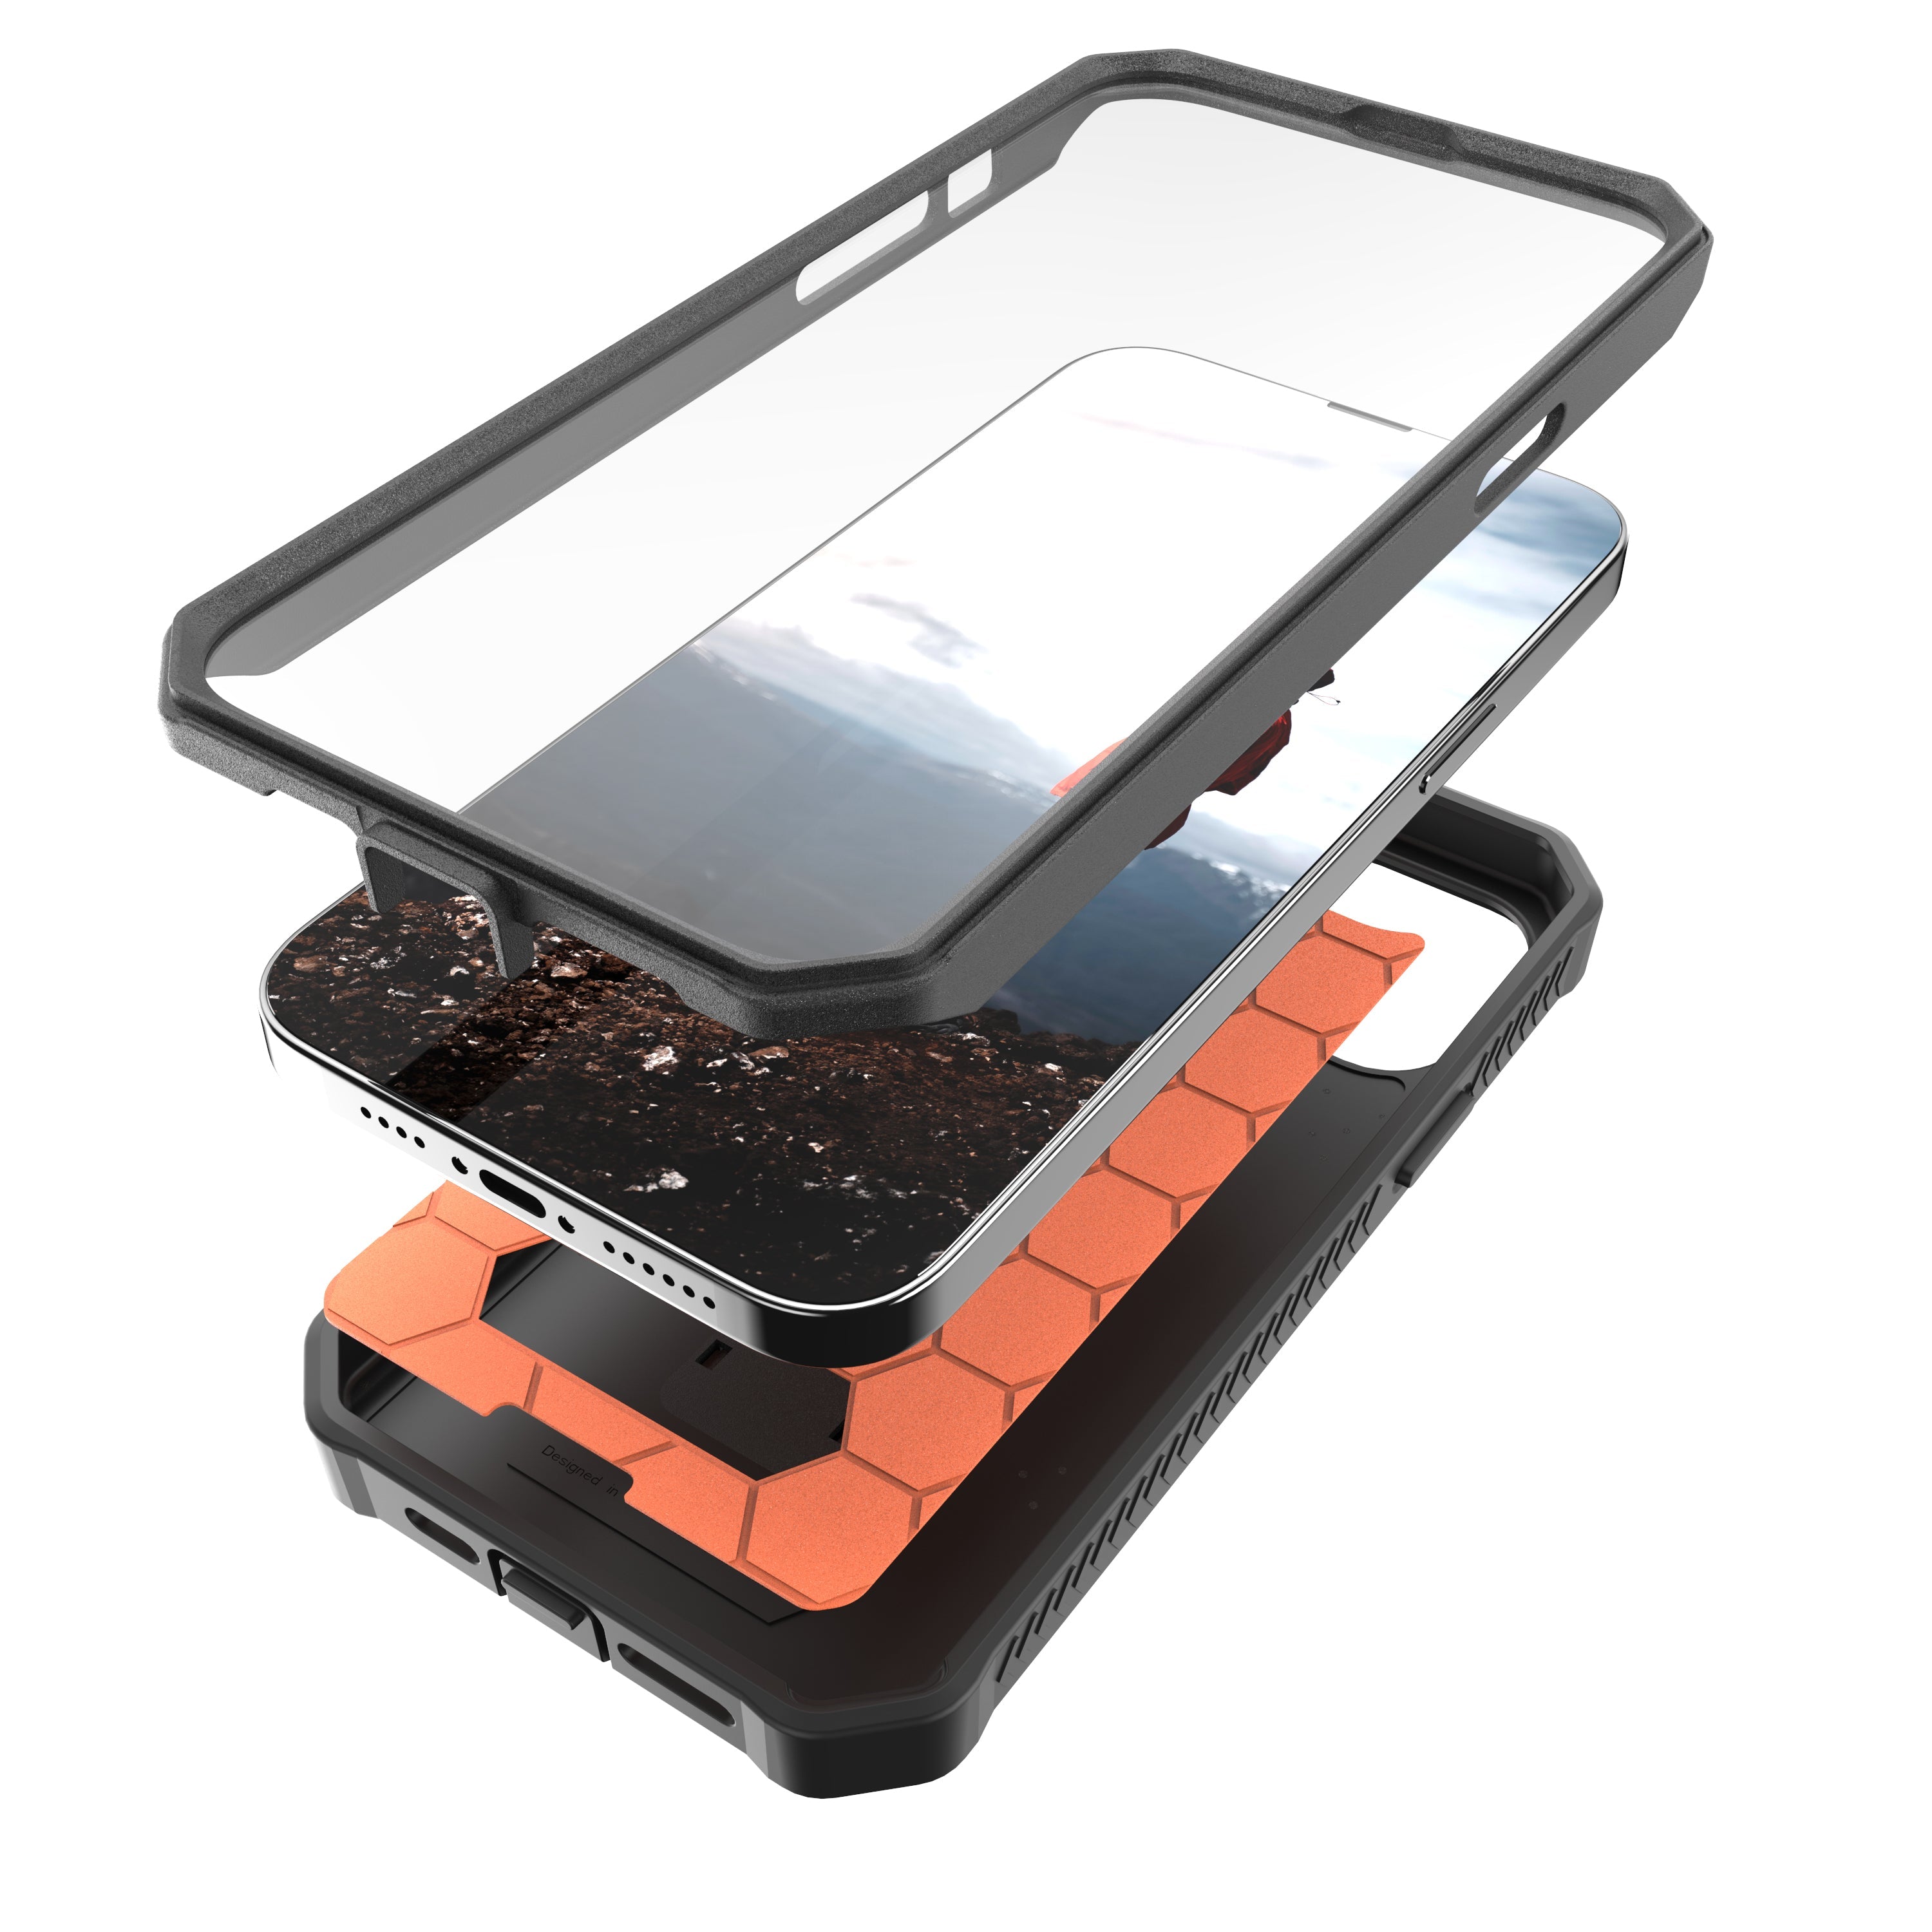 Rugged iPhone 14 pro max case